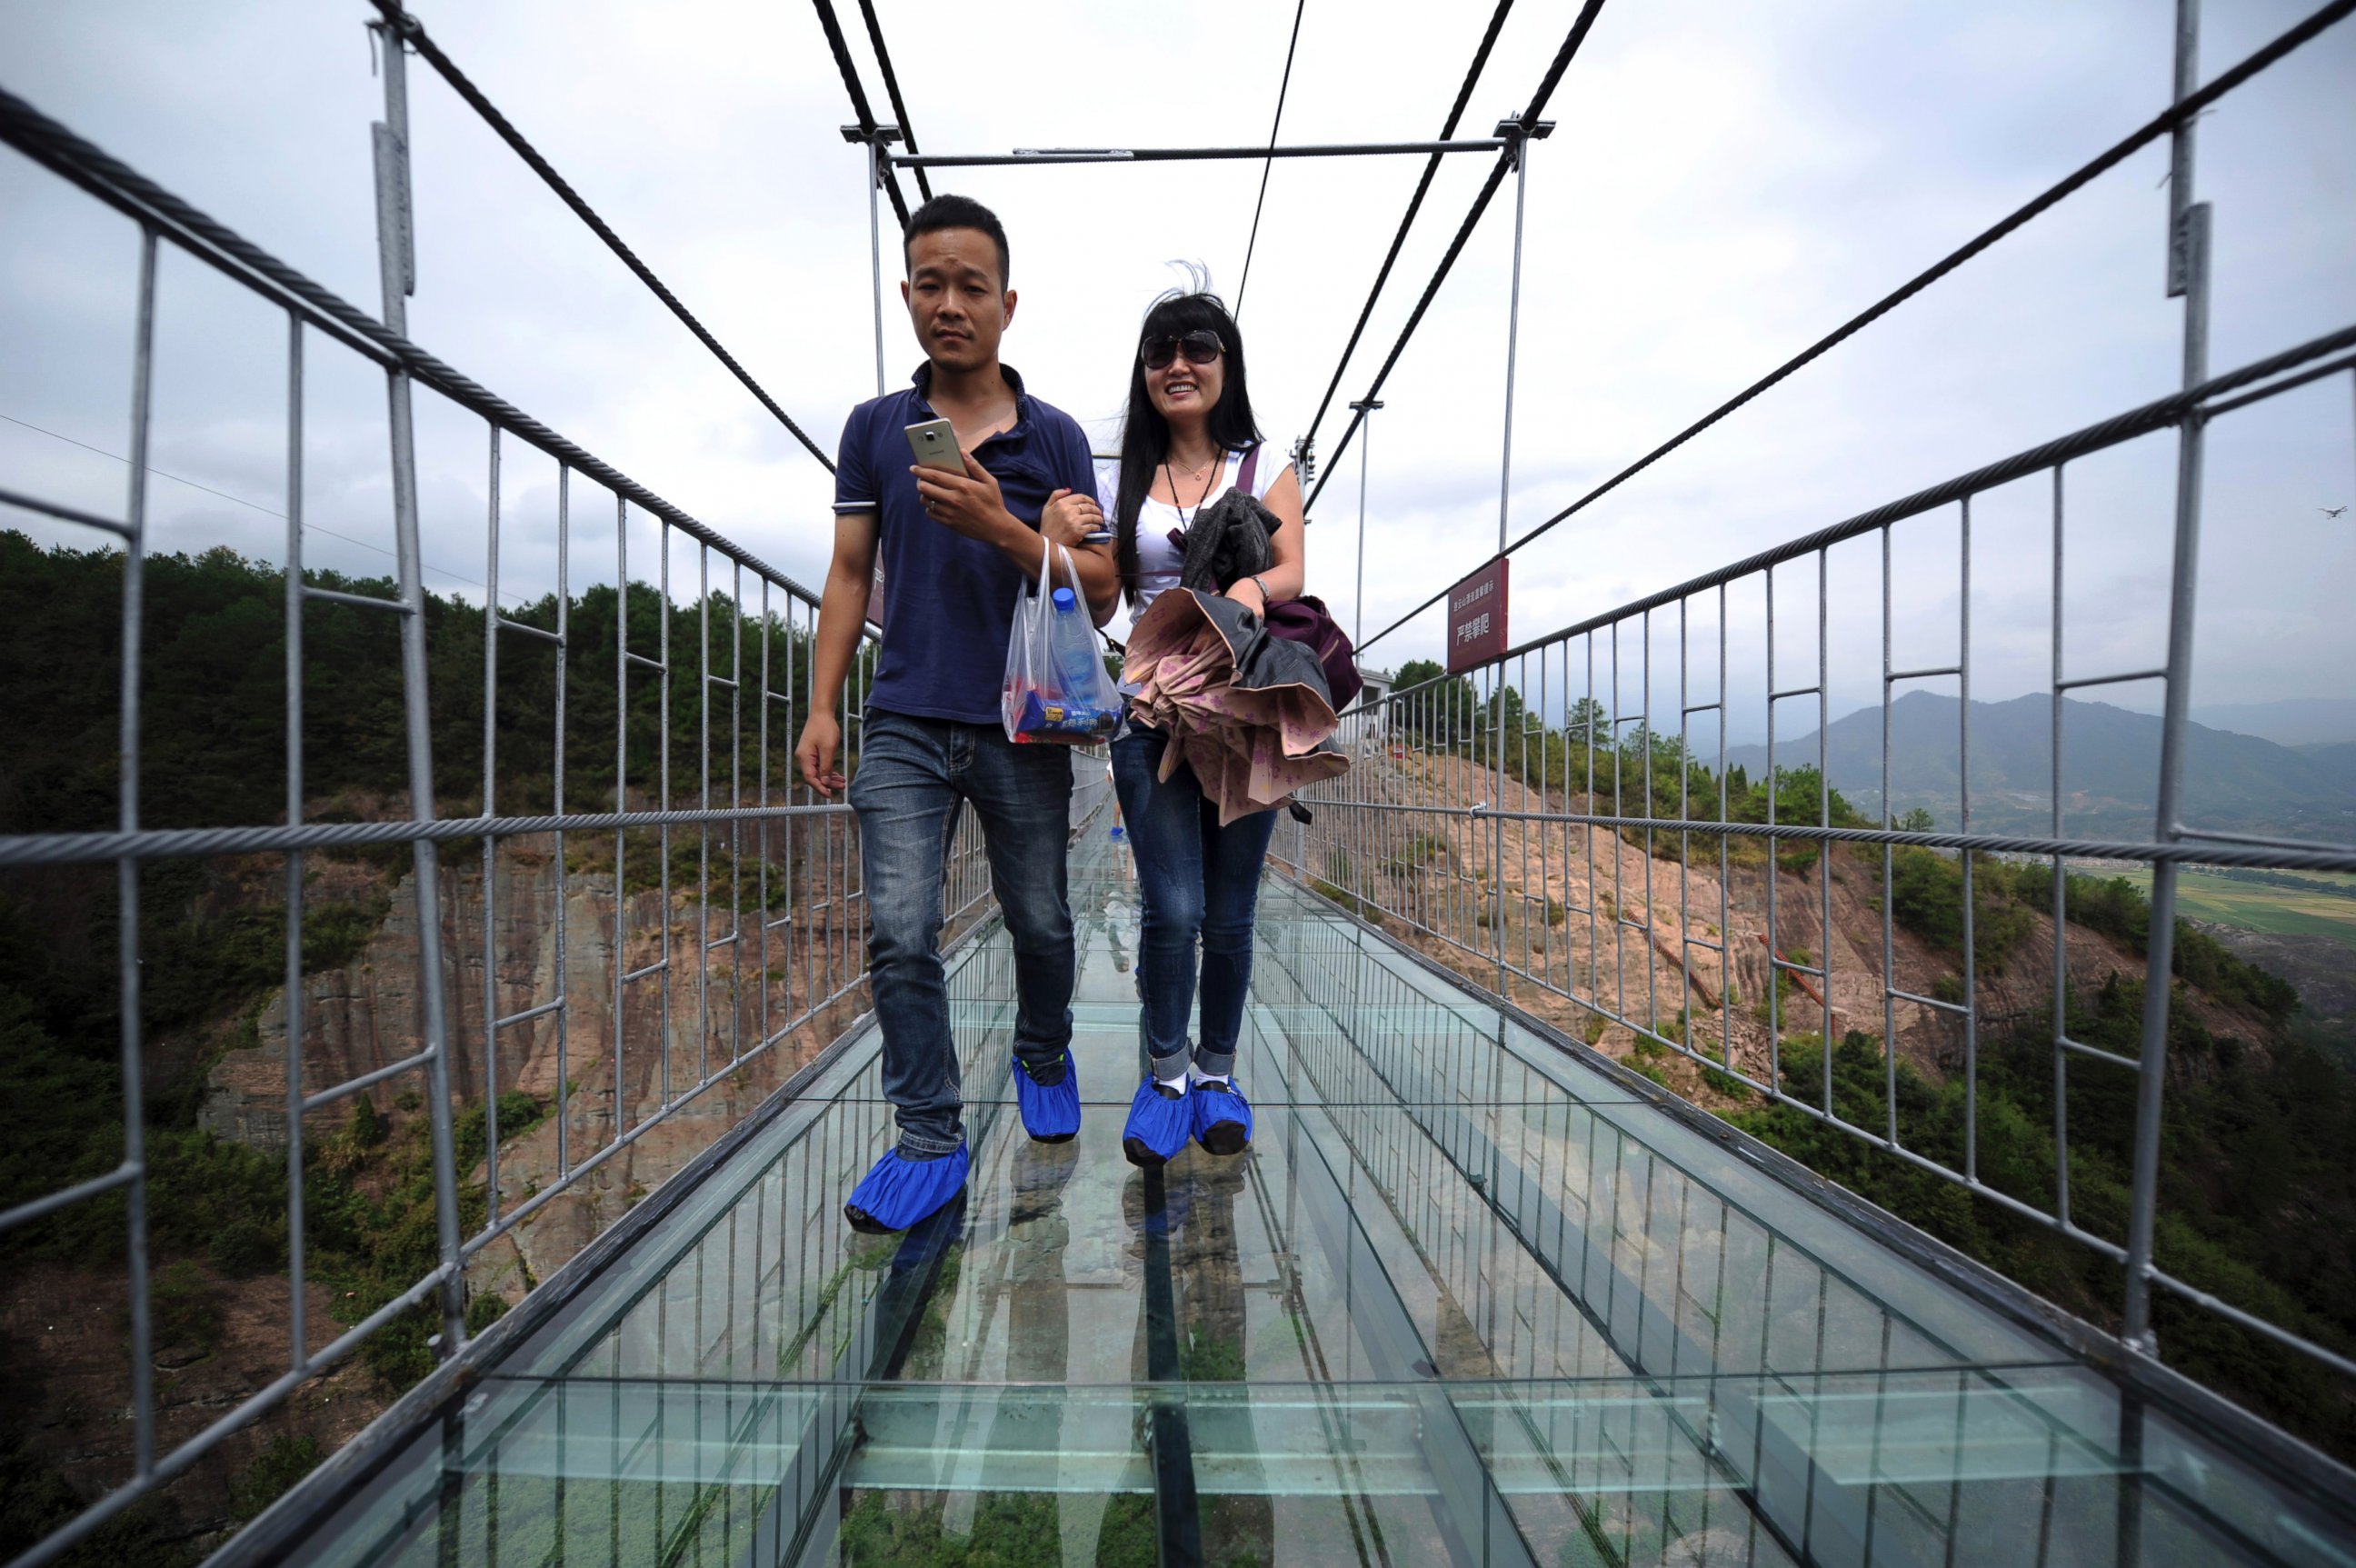 PHOTO: Visitors wear protective shoe coverings as they walk across a glass-bottomed suspension bridge in a scenic zone in Pingjiang county in southern China's Hunan province, Sept. 24, 2015. 